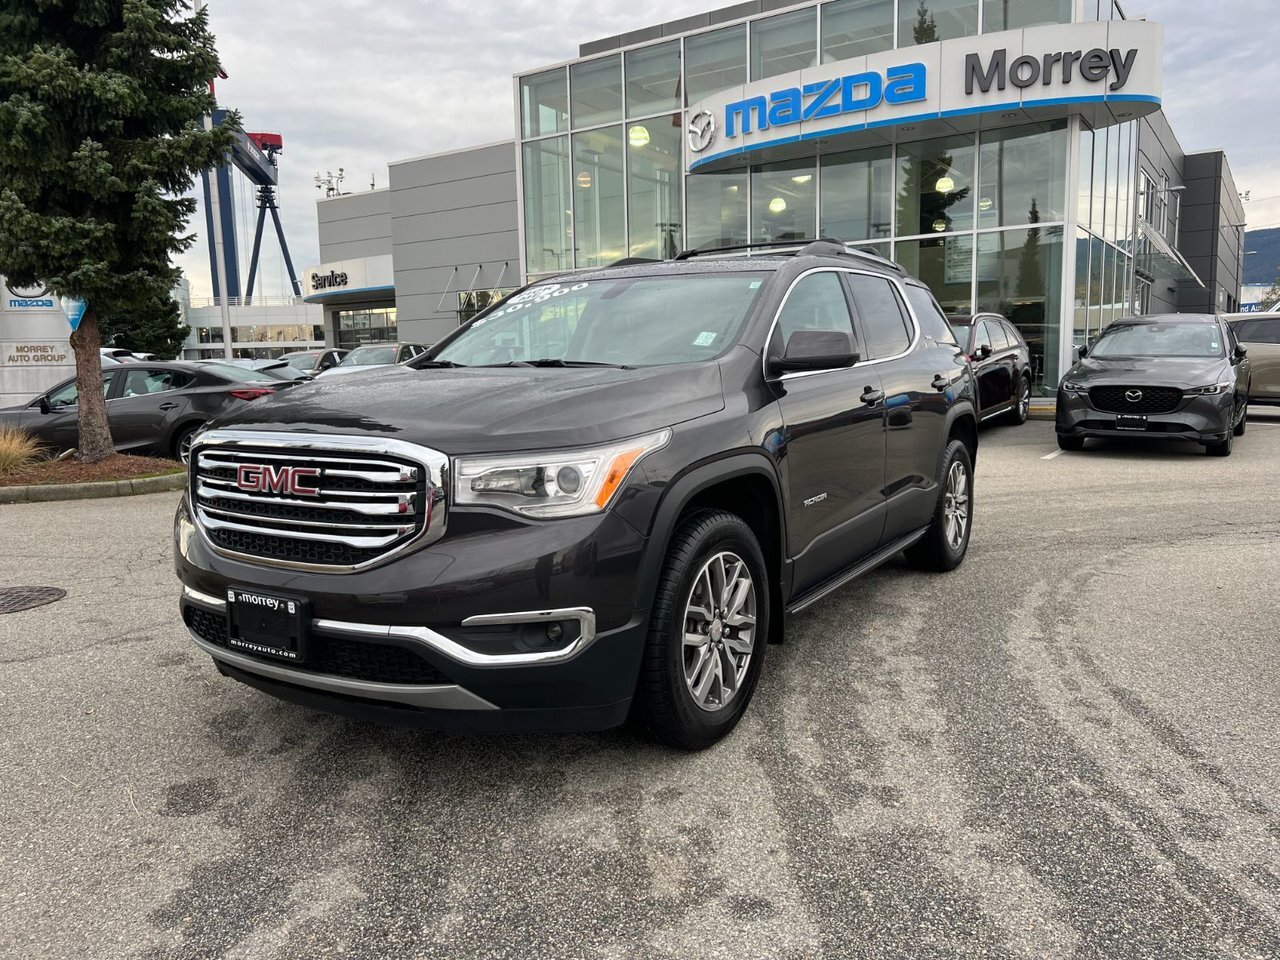 2018 GMC Acadia AWD SLE2 Locally owned! On sale. Ready for immedia